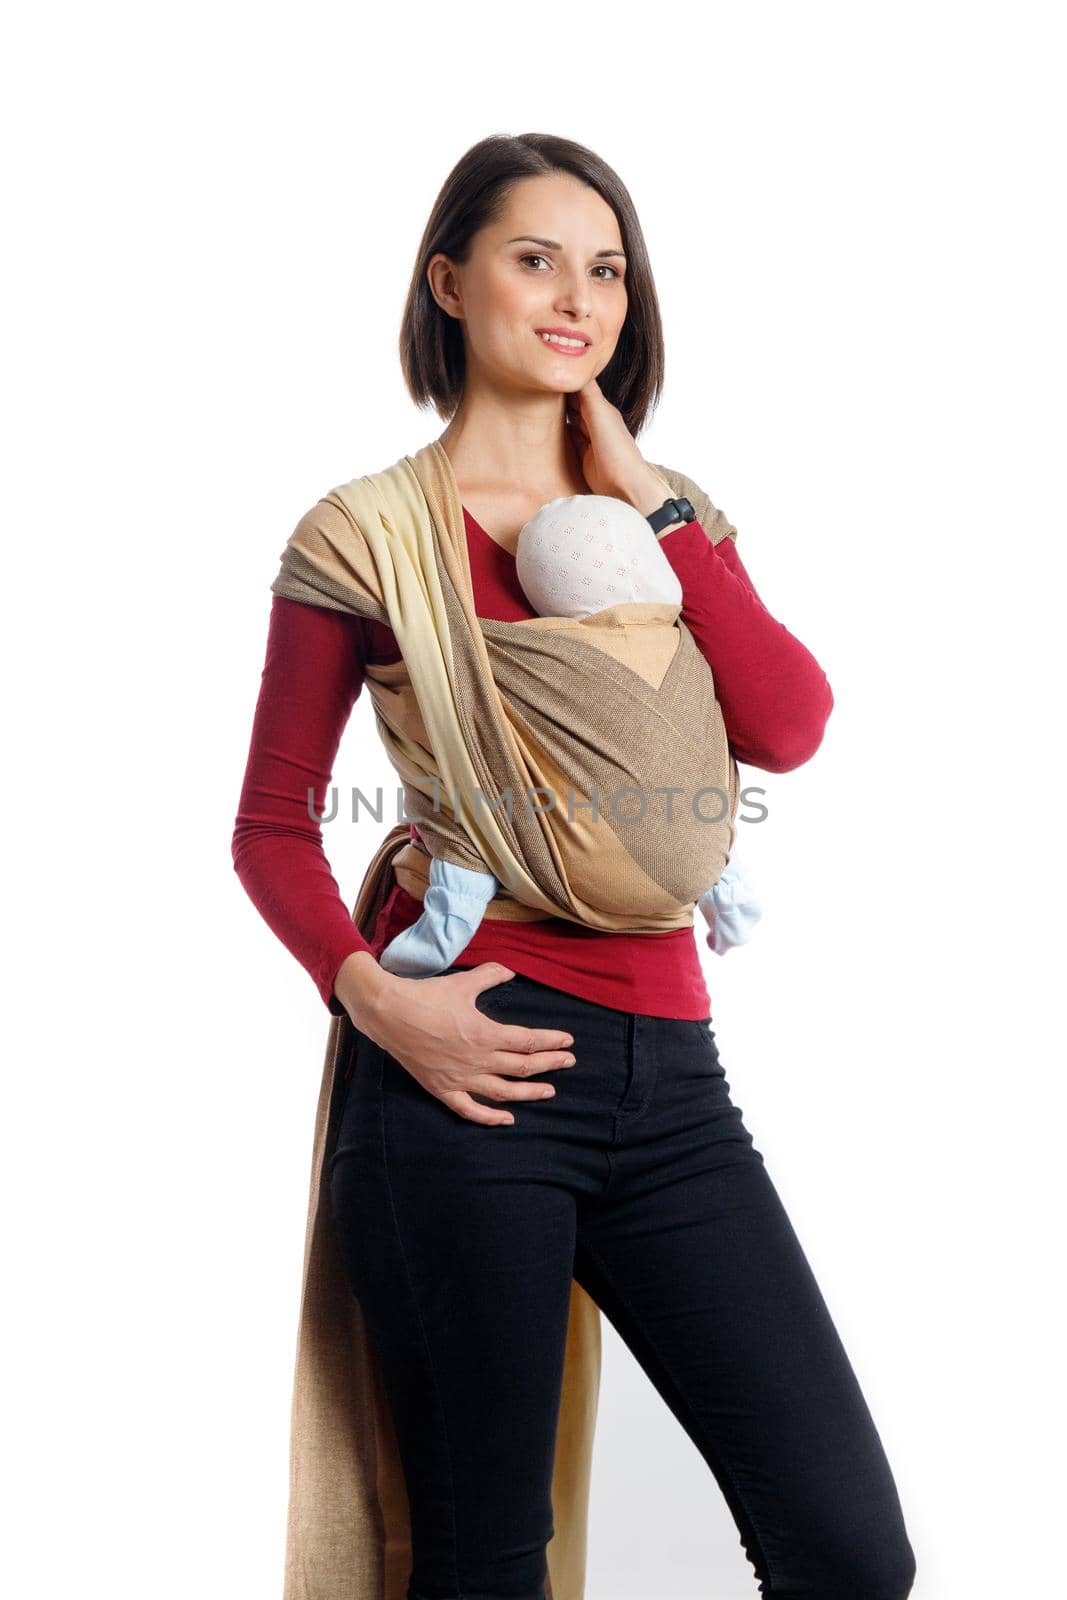 Baby wearing attractive young mother with baby in woven wrap carrier. Free hands and active motherhood concept idea by Rom4ek